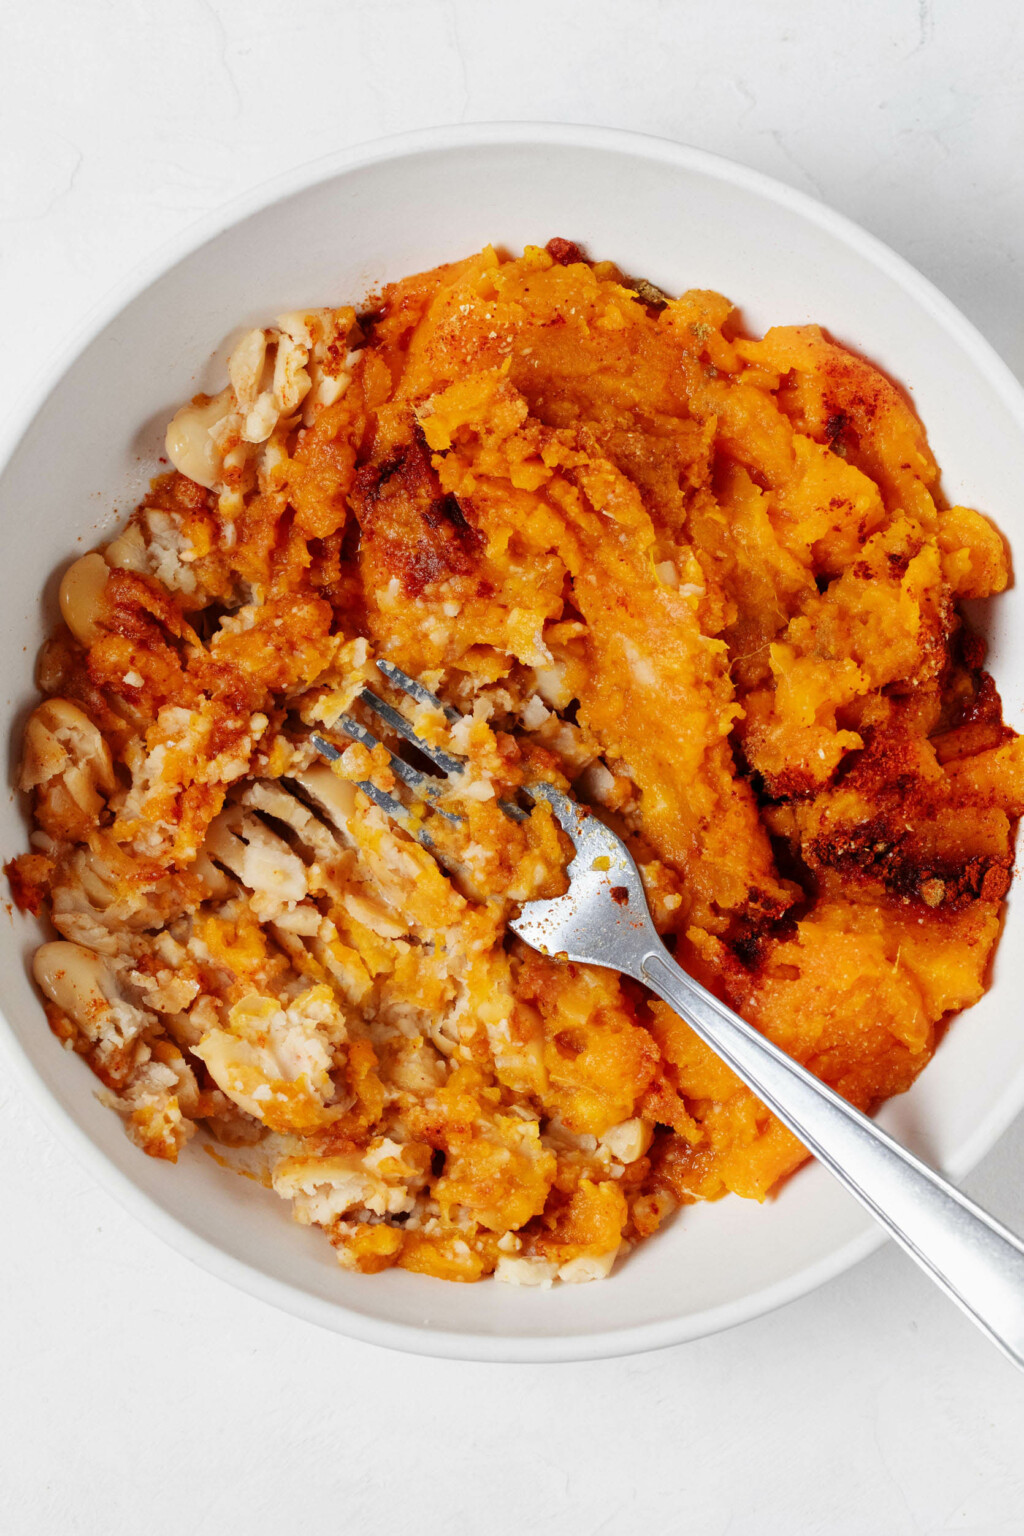 A white round bowl is filled with a mixture of sweet potato and white beans, which is being mashed with a fork.